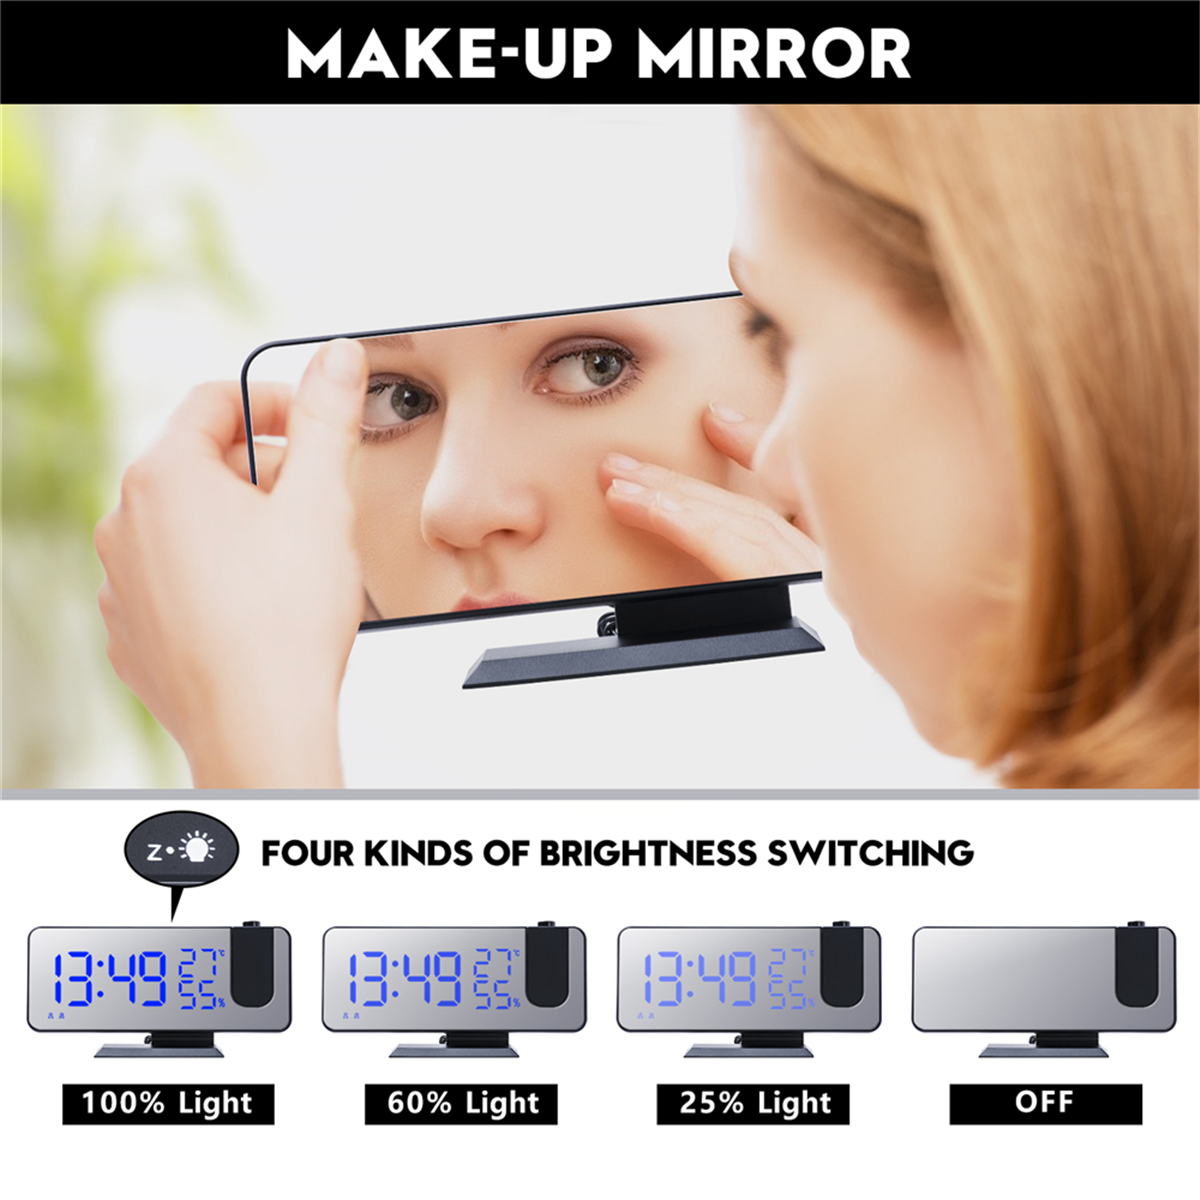 LED-Mirror-Alarm-Clock-Big-Screen-Temperature-and-Humidity-Display-with-Radio-and-Time-Projection-Fu-1751898-6